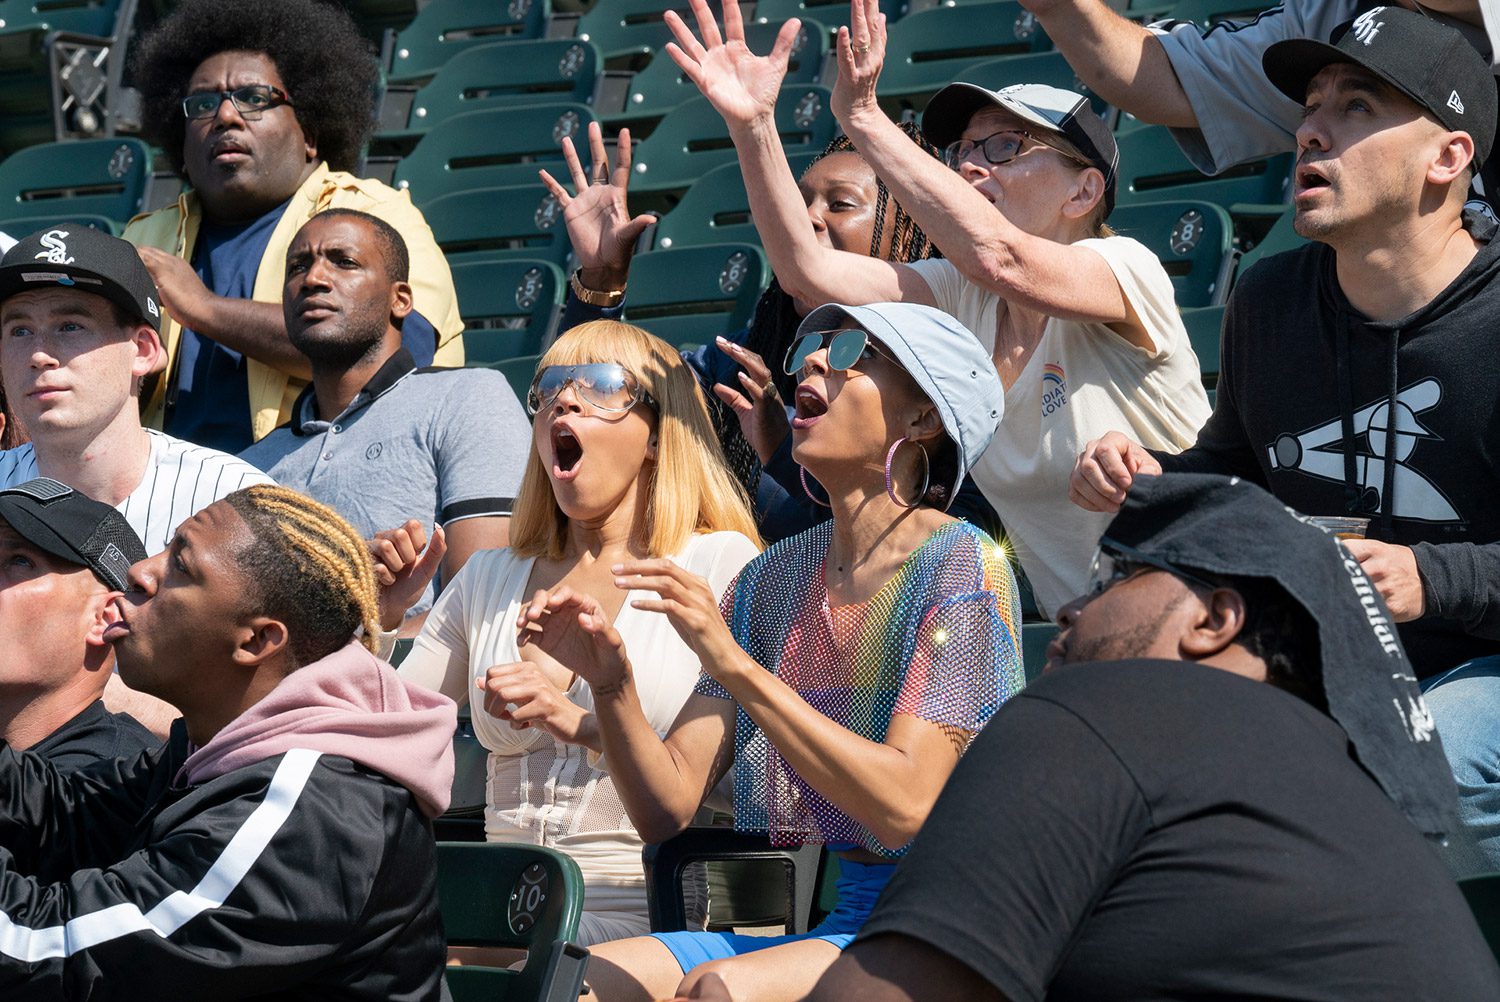 alt=" The cast of South Side at the baseball match*